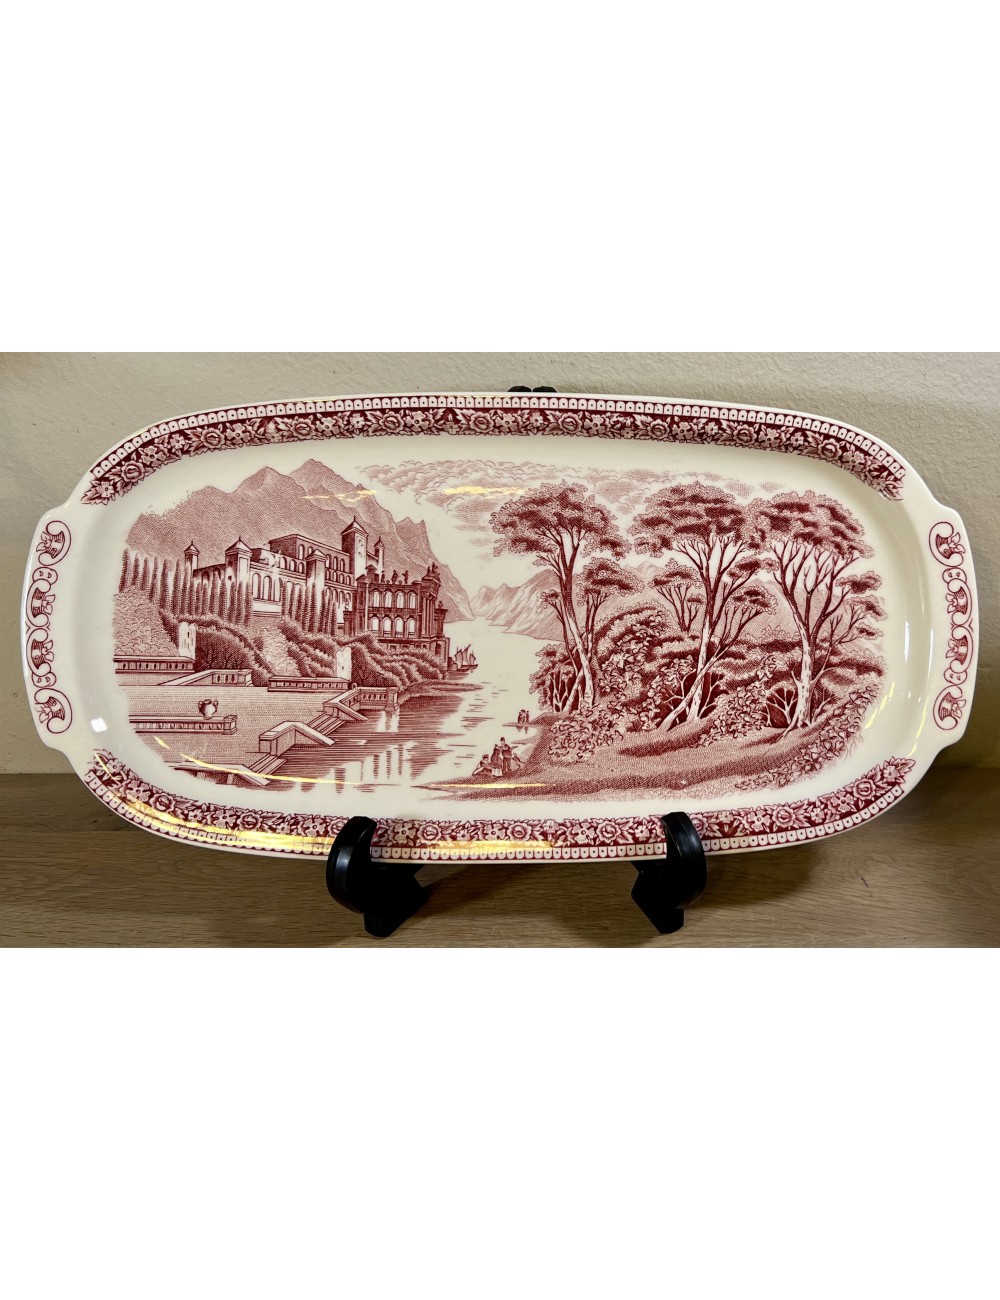 Cake dish / Cake plate - Royal Sphinx/Regout - décor OLD ENGLAND - CAMBRIDGE executed in red